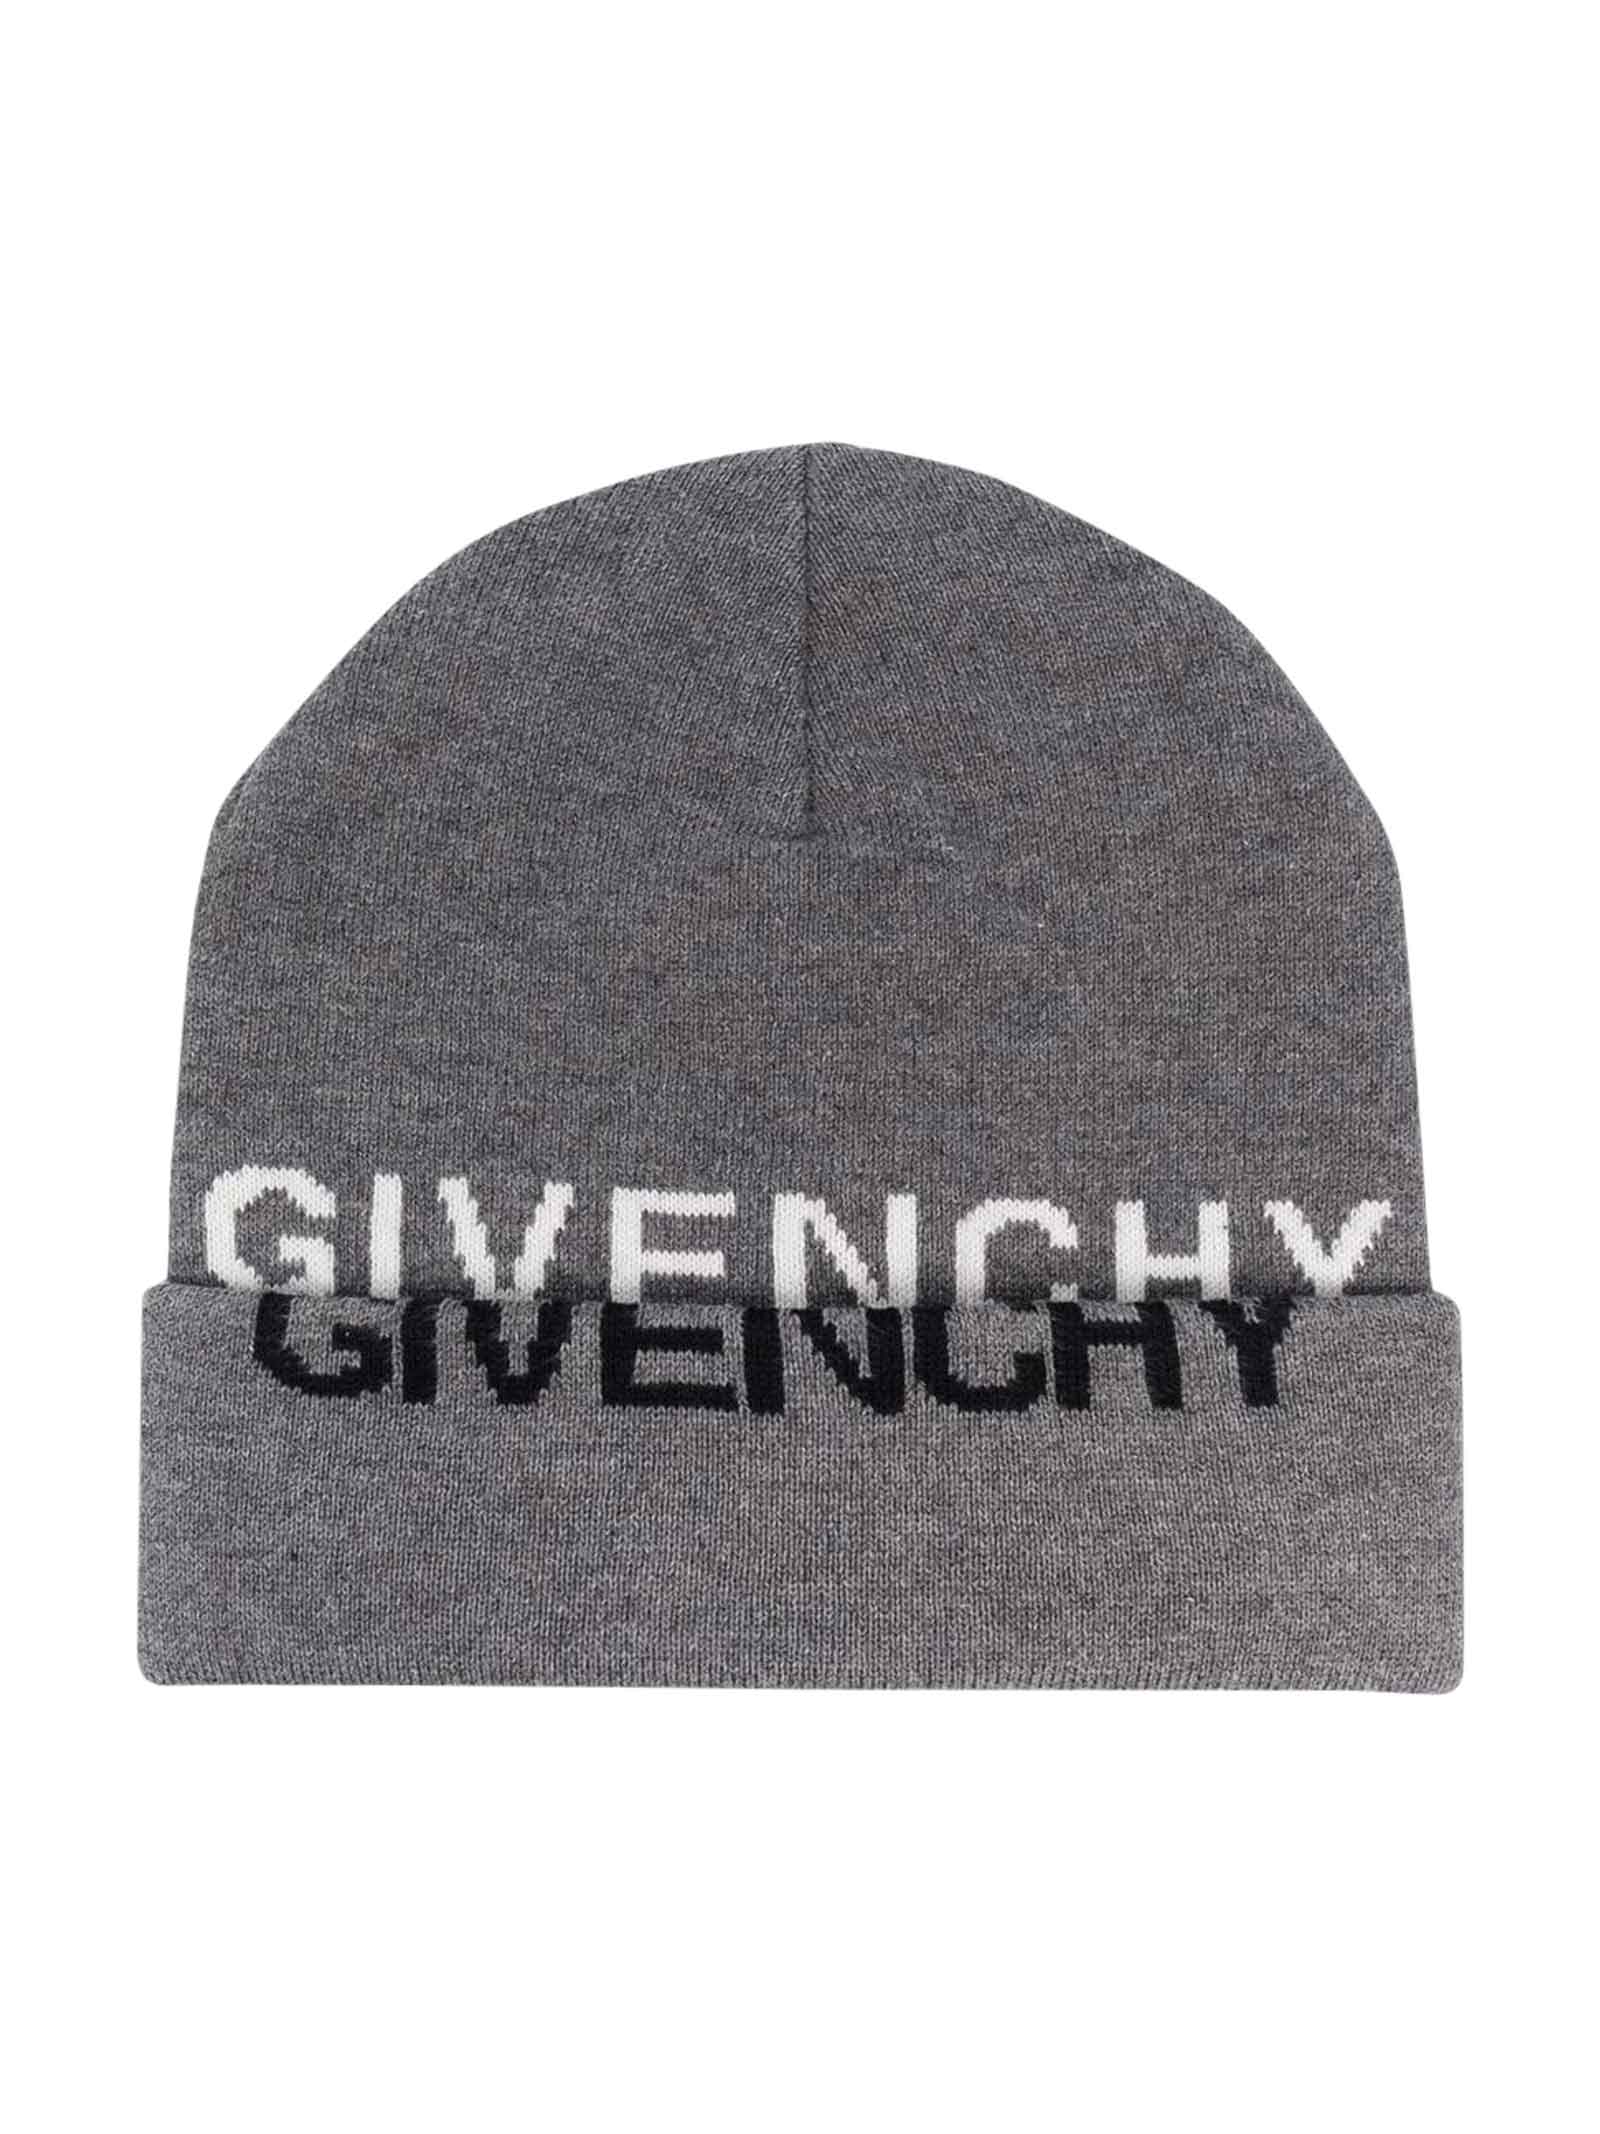 Givenchy Gray Hat Unisex